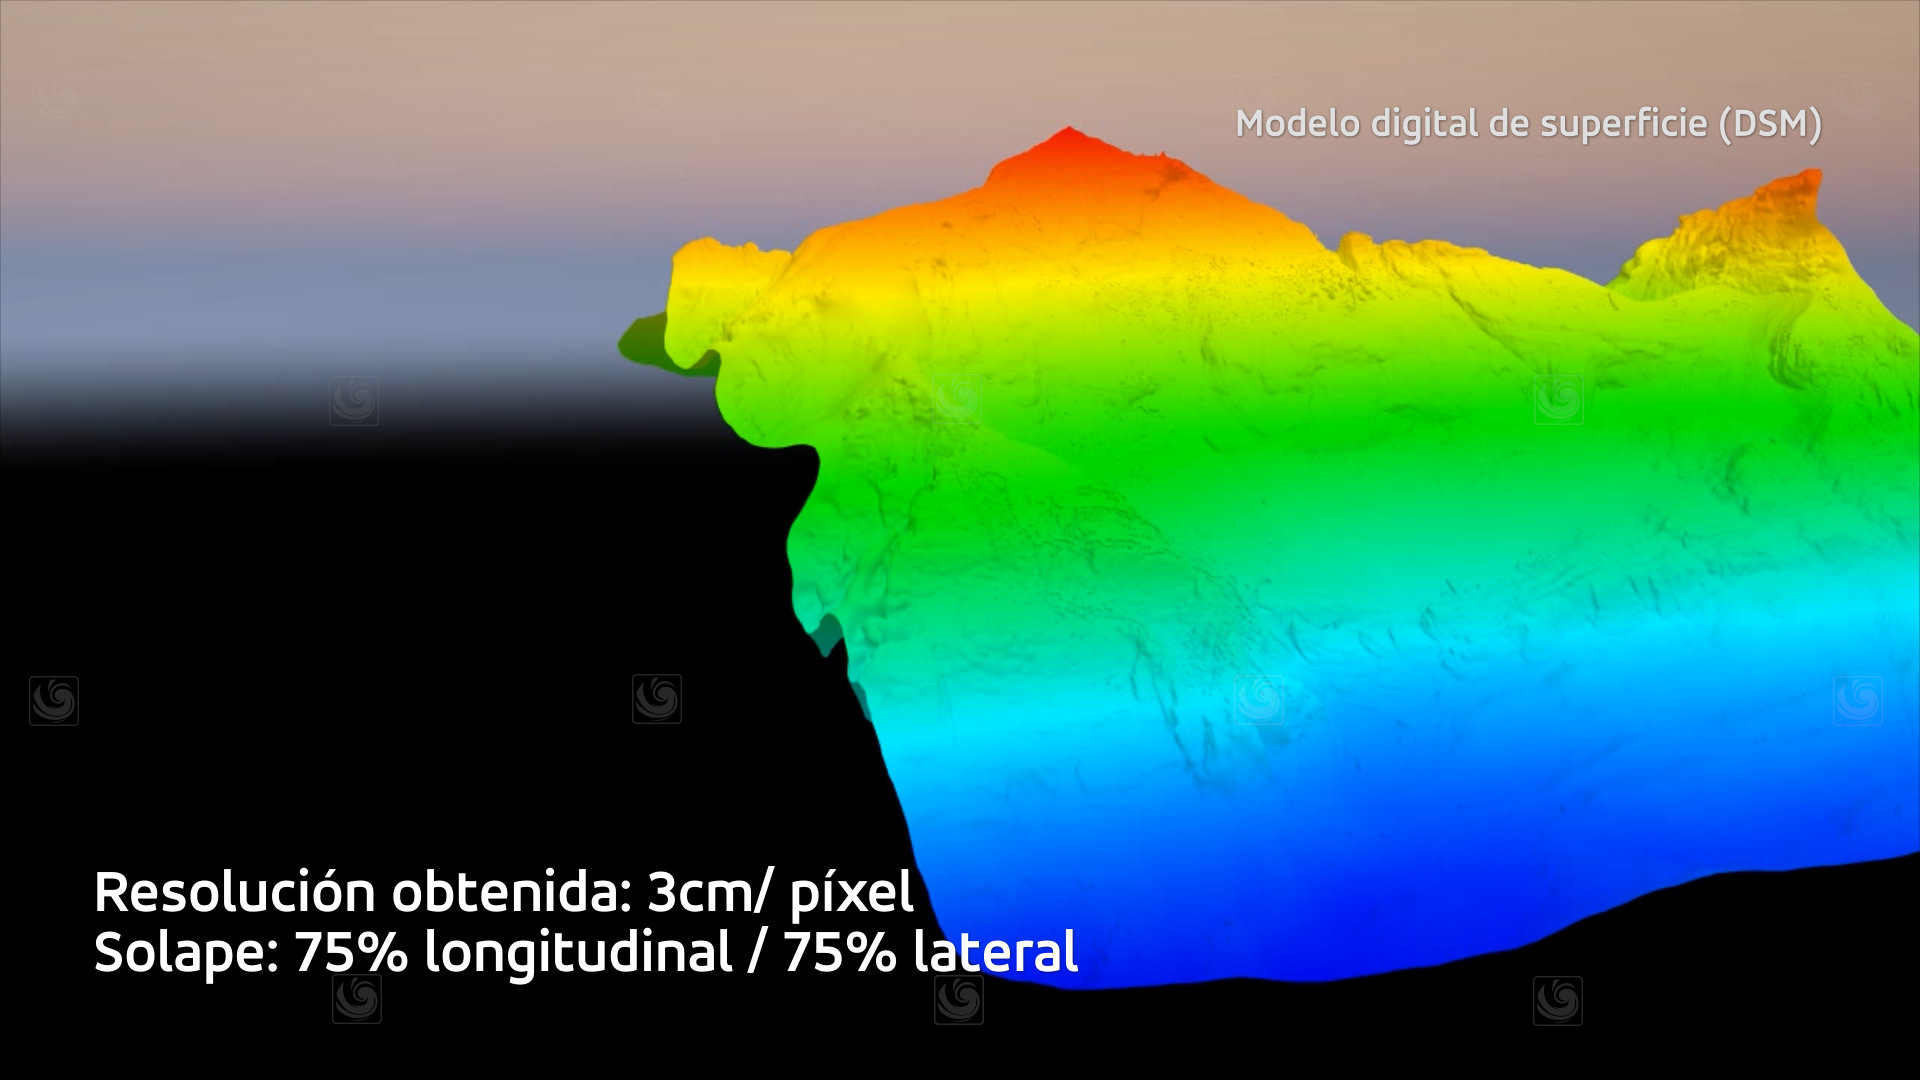 Videoframe showing an animation of graphic elements, related to the results of photogrammetry tasks